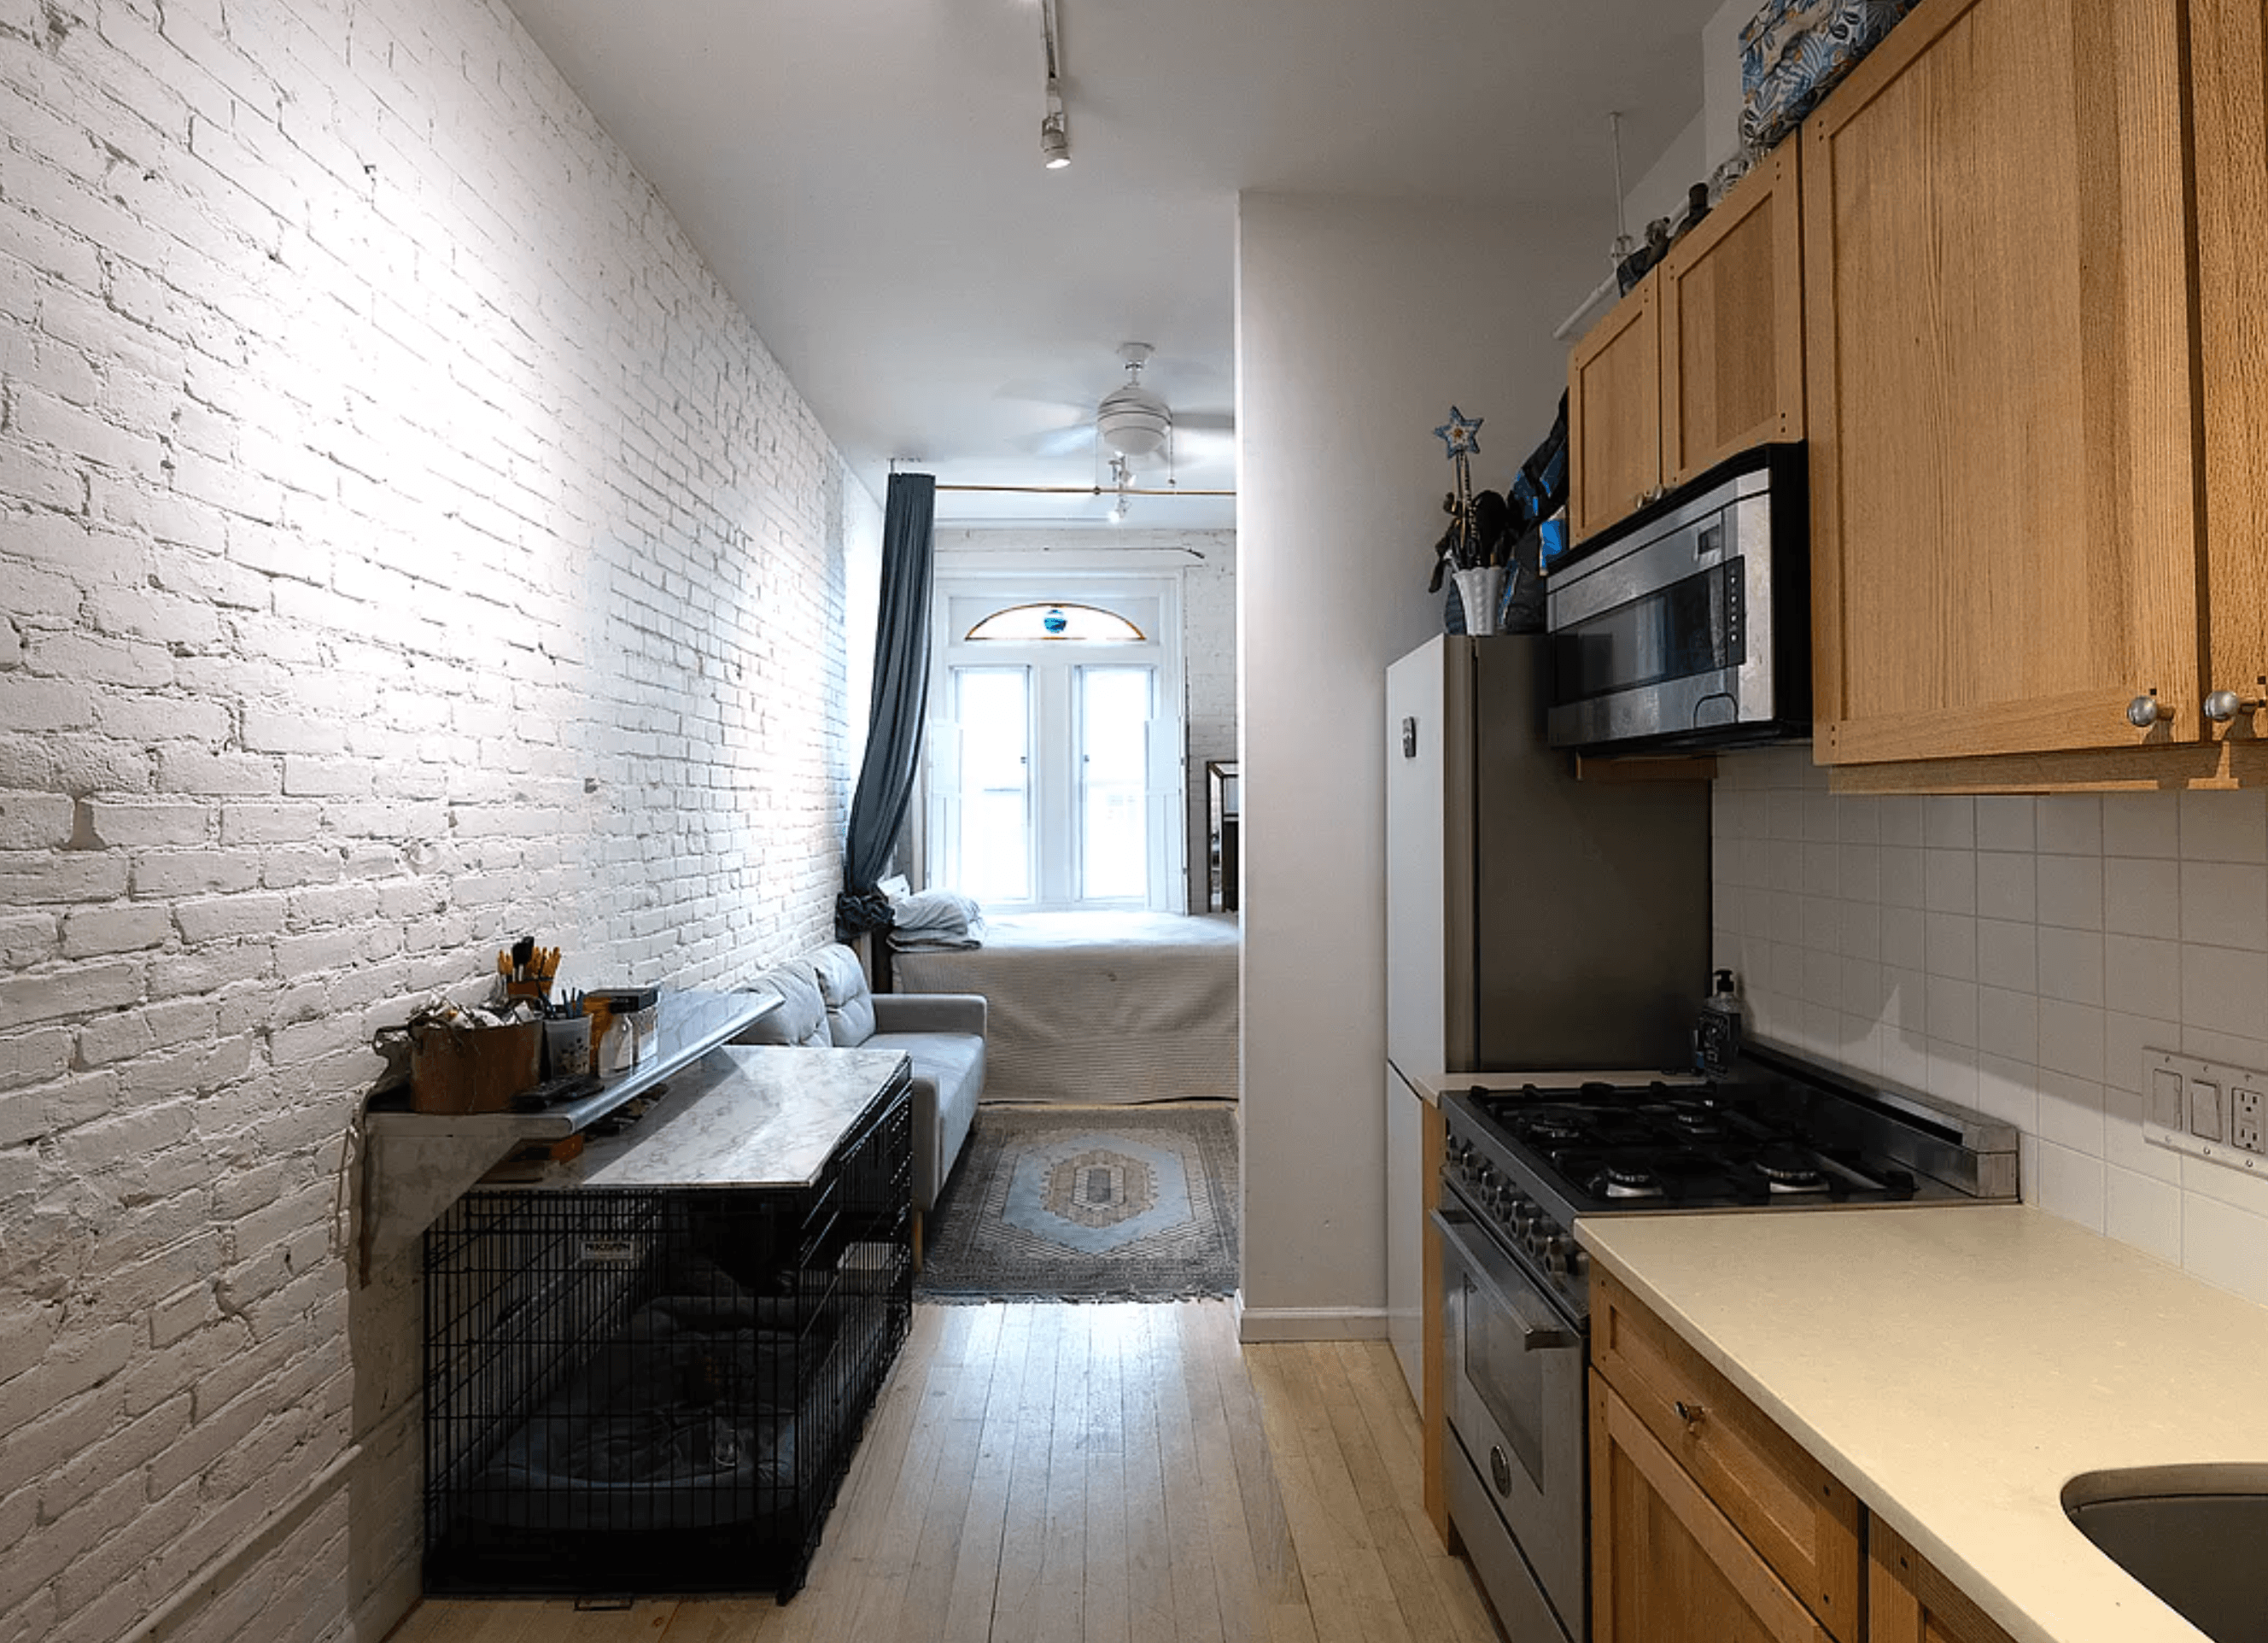 LARGE STUDIO LOFT WITH 11 FT CEILINGS. MODERN KITCHEN AND BATH.